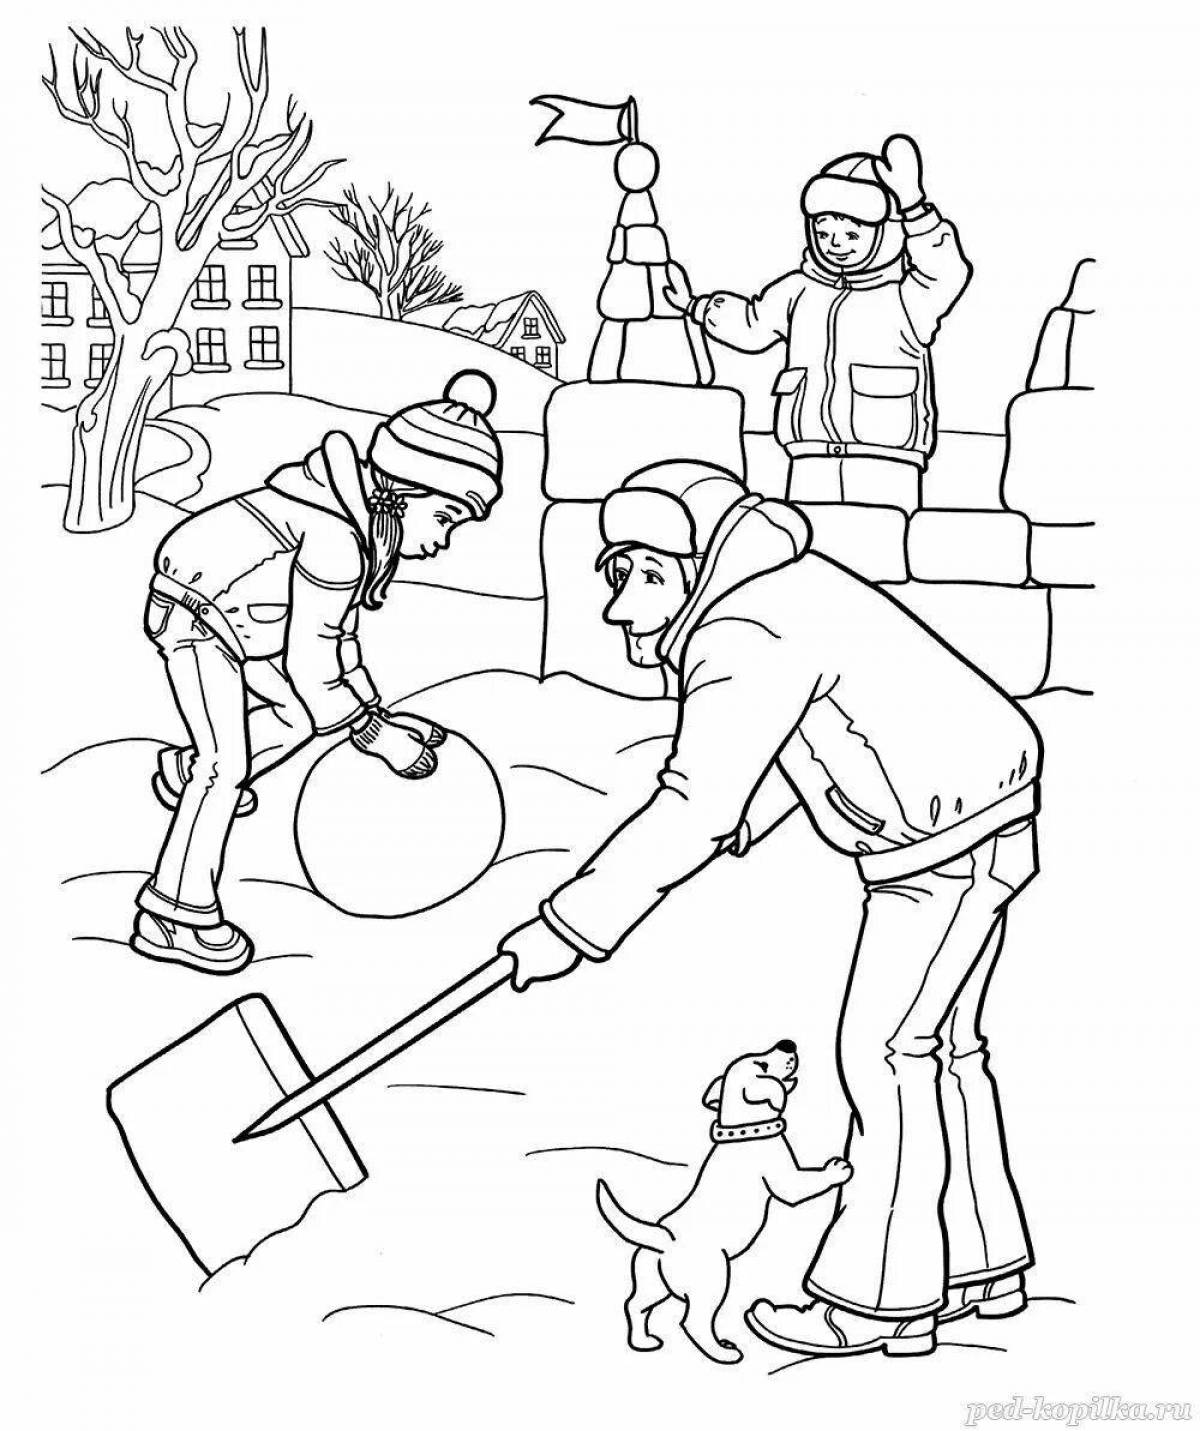 Coloring page cheerful snowy town